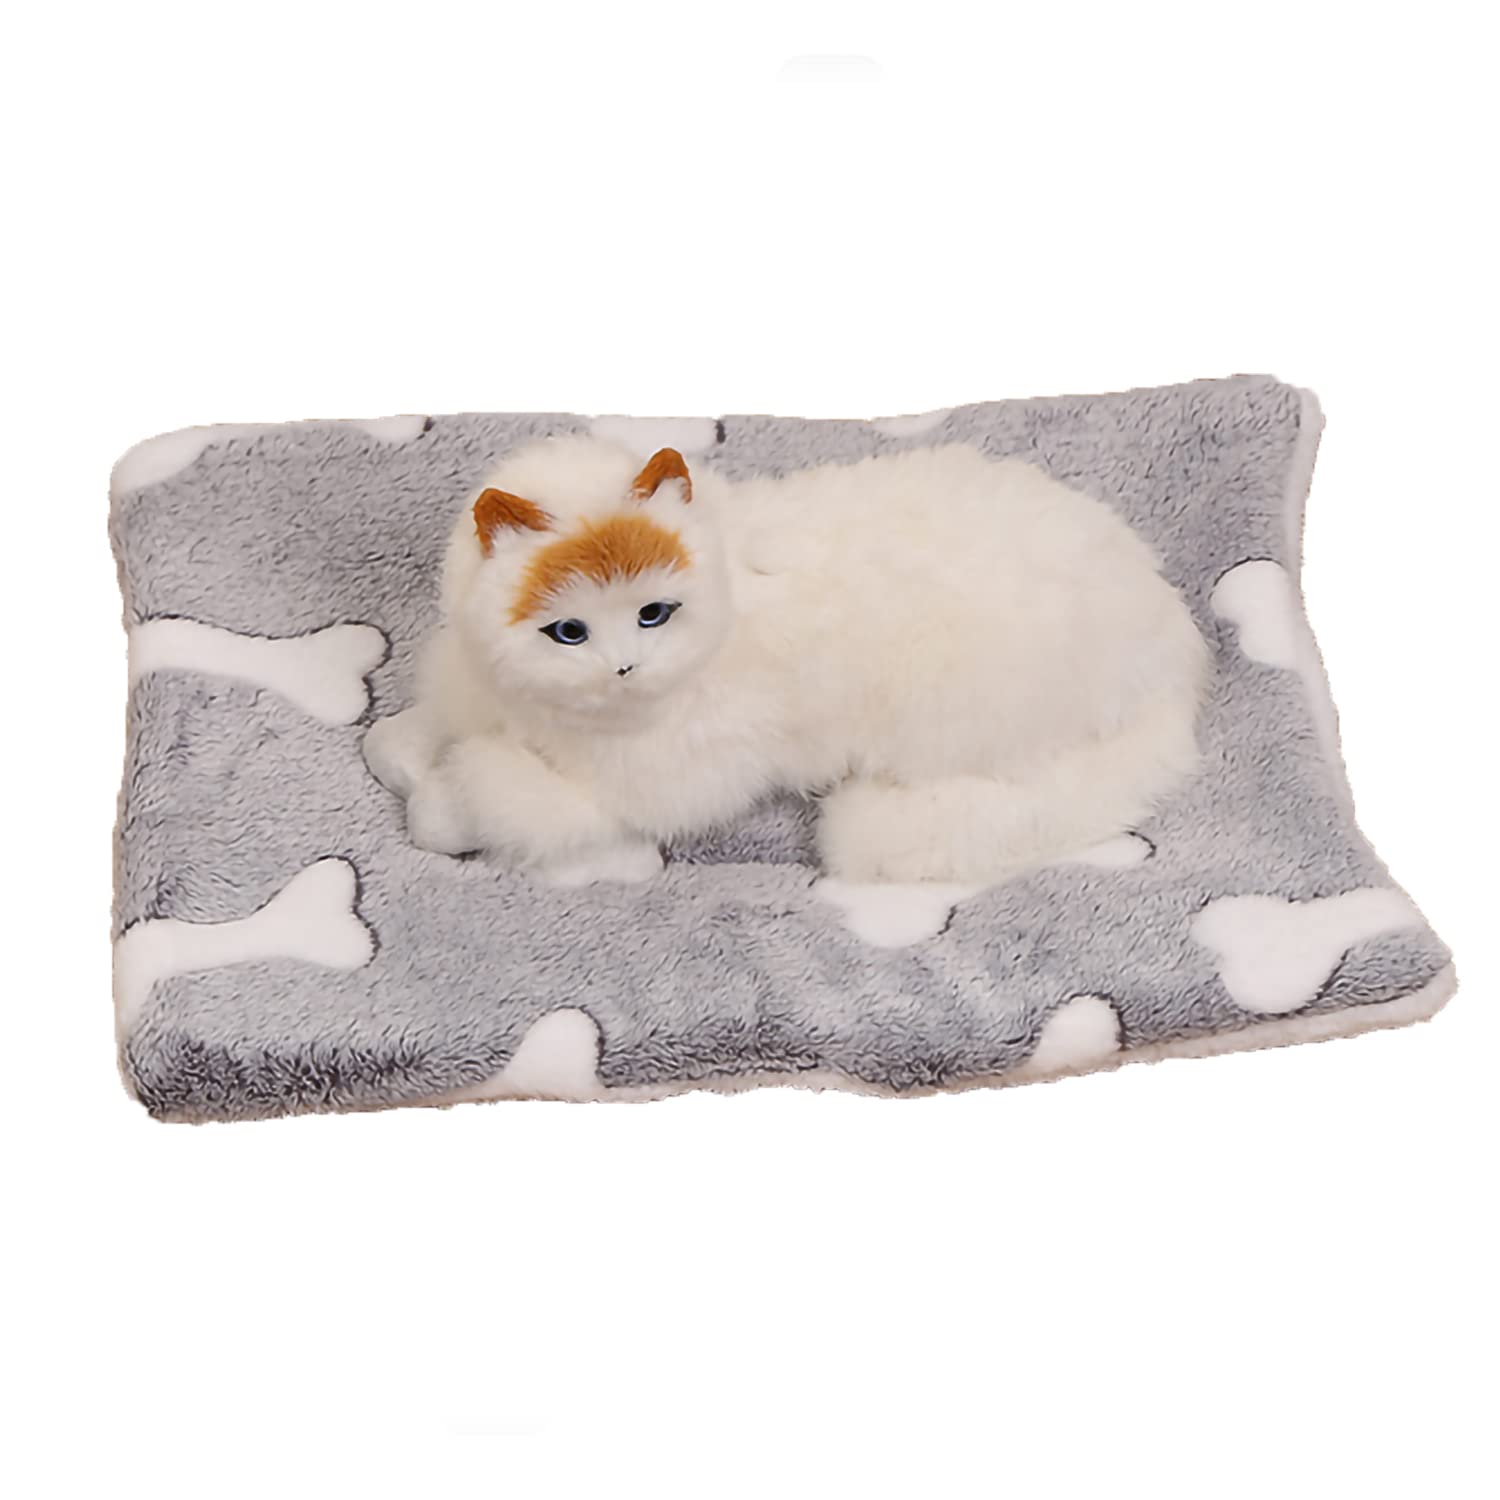 Uirpk Cozy Calming Cat Blanket,Cozy Cat Calming Blanket,Calming Blanket For Cats,Cozy Calming Cat Blanket For Anxiety And Stress